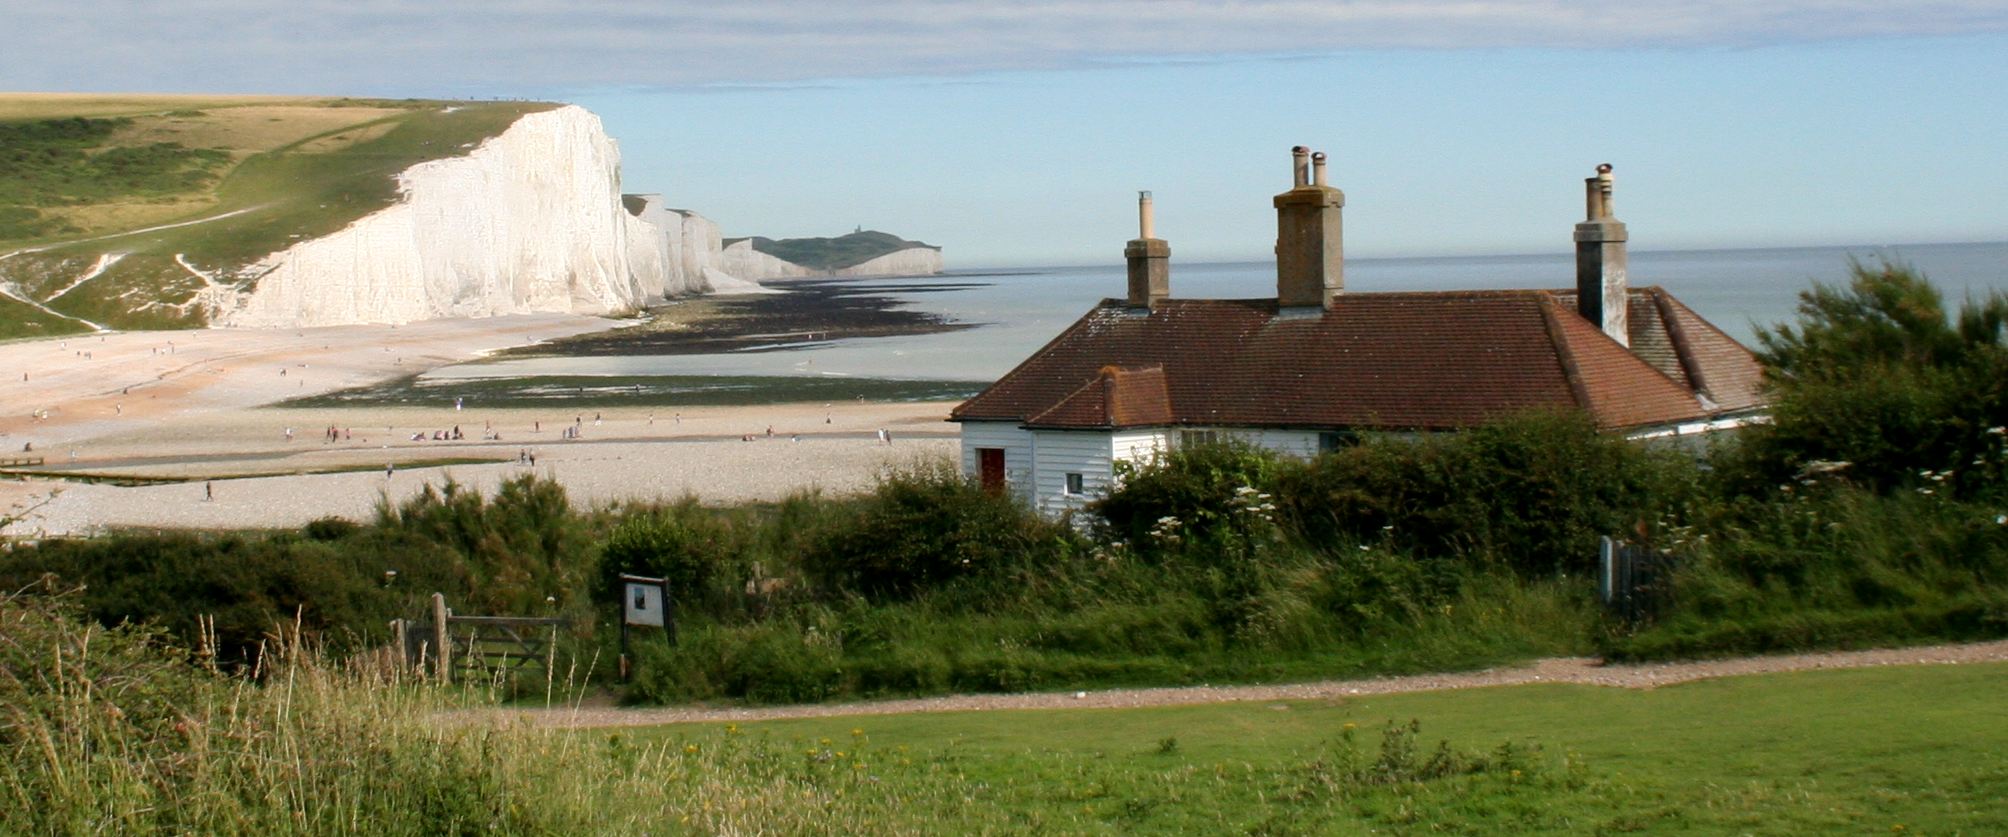 Cuckmere Haven and Seven Sisters chalk cliffs fronting the English Channel